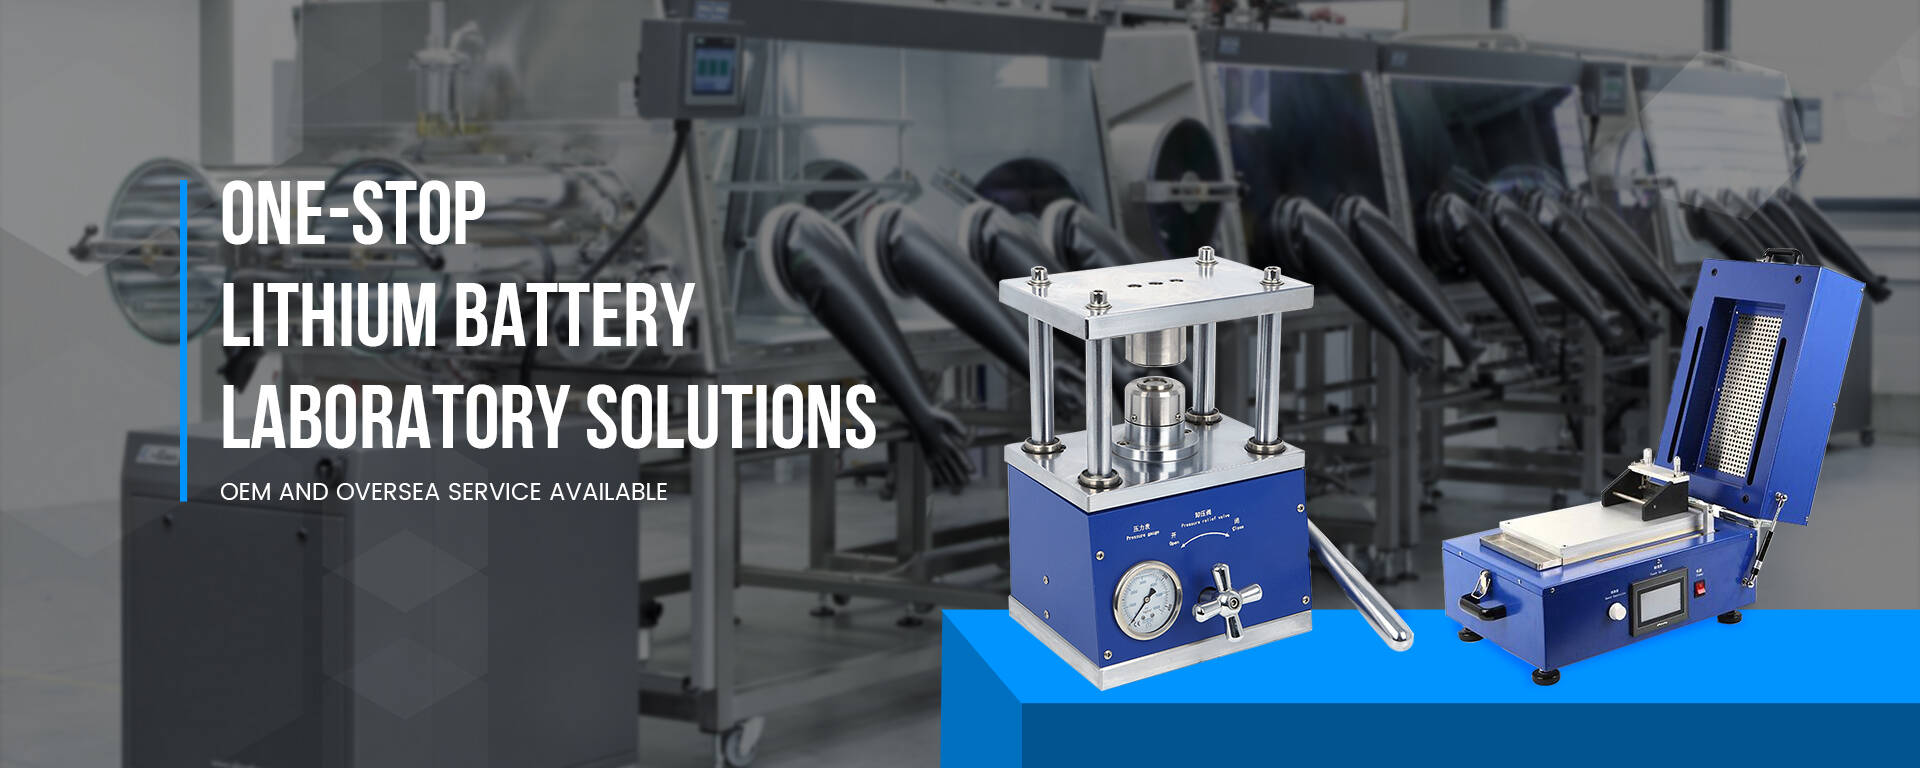 One-stop lithium battery lab solutions